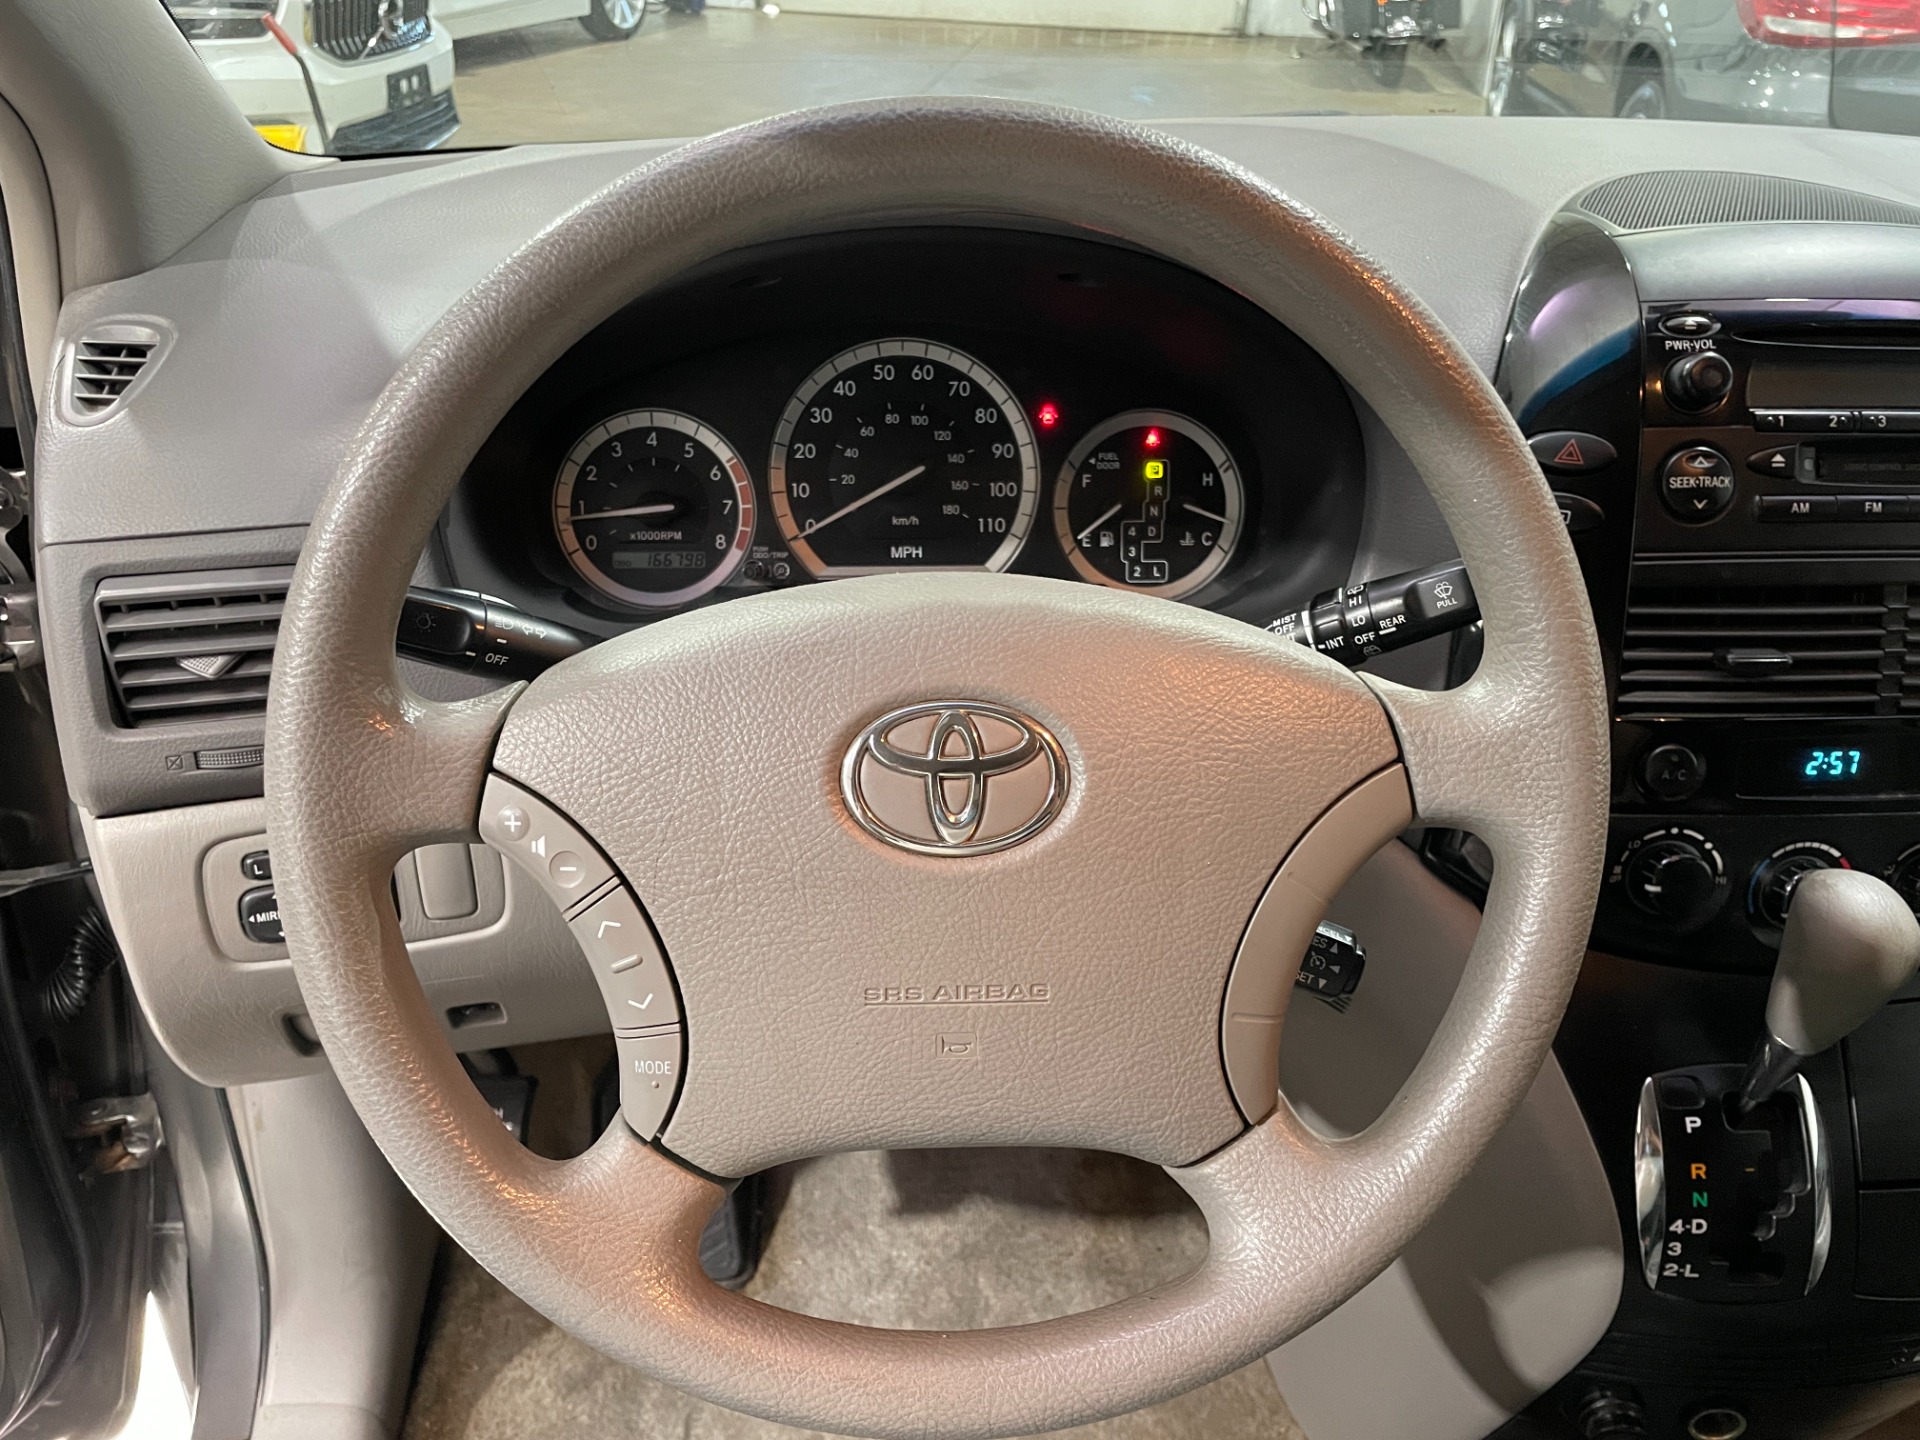 Used-2005-Toyota-Sienna-LE-7-Passenger-FWD